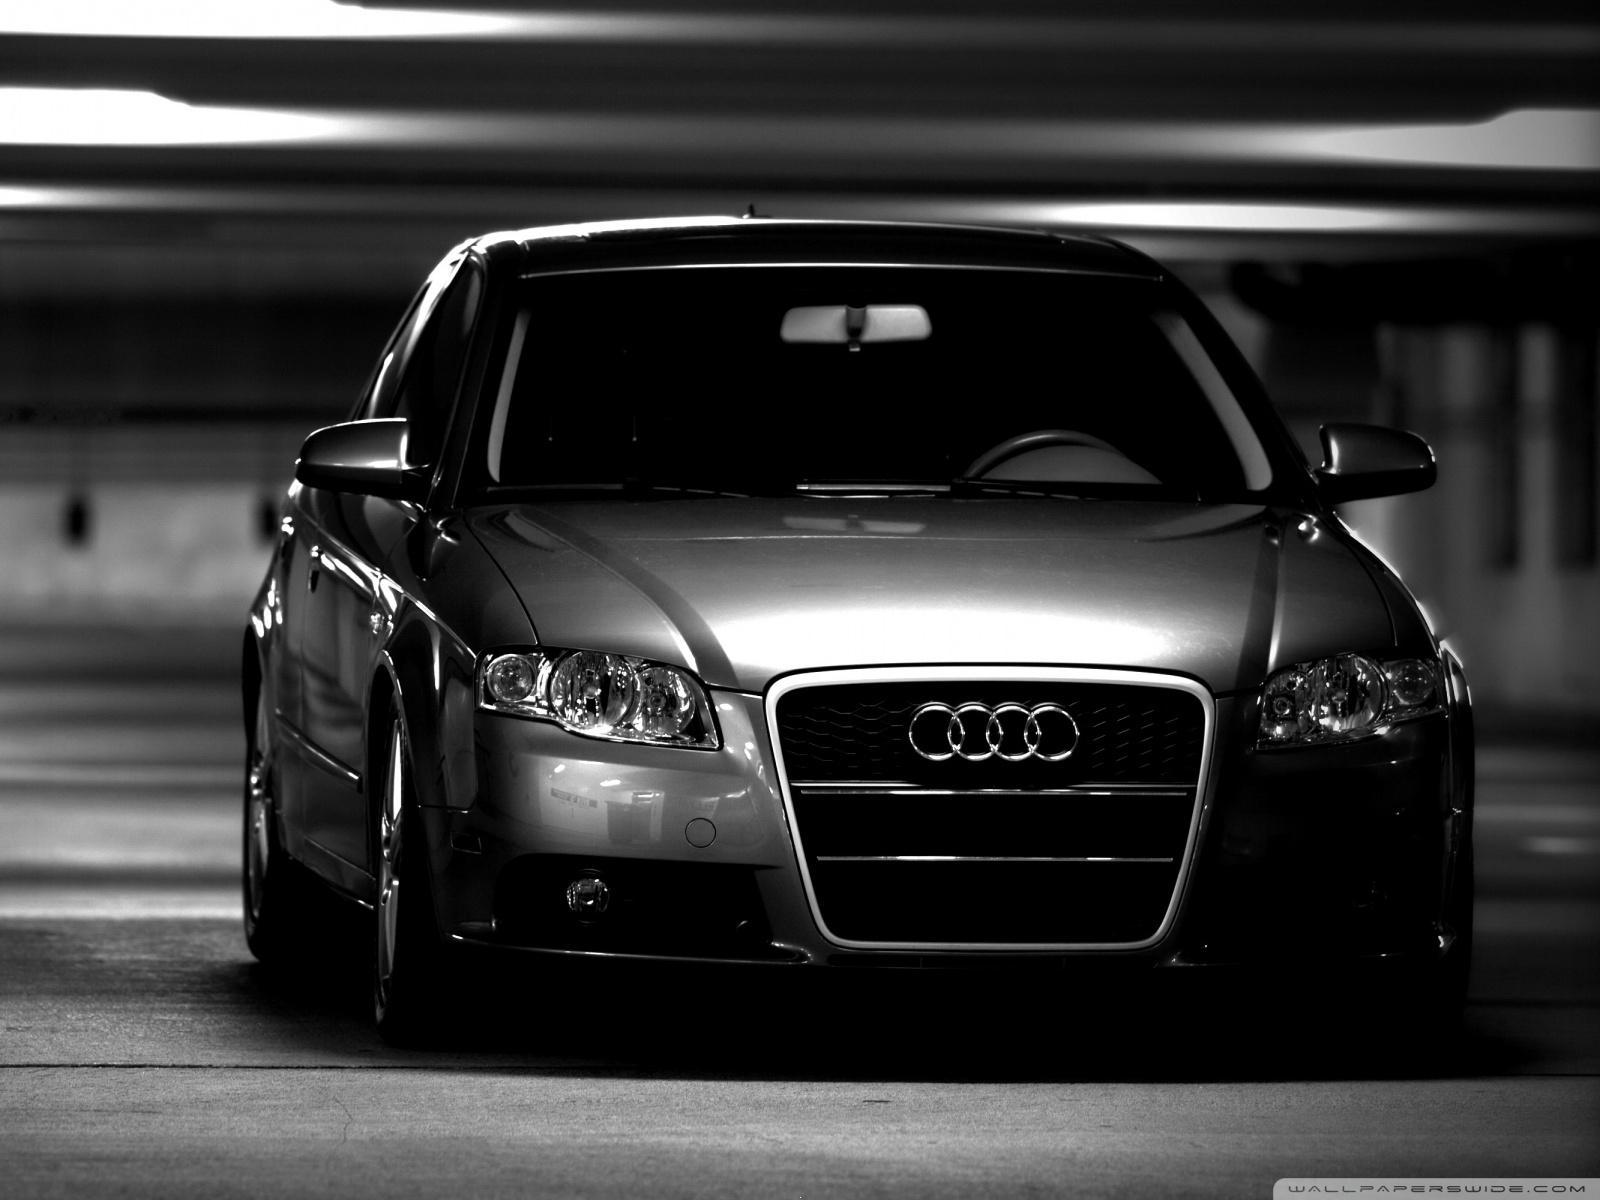 Download Audi black wallpaper - Cars wallpapers for your mobile cell phone